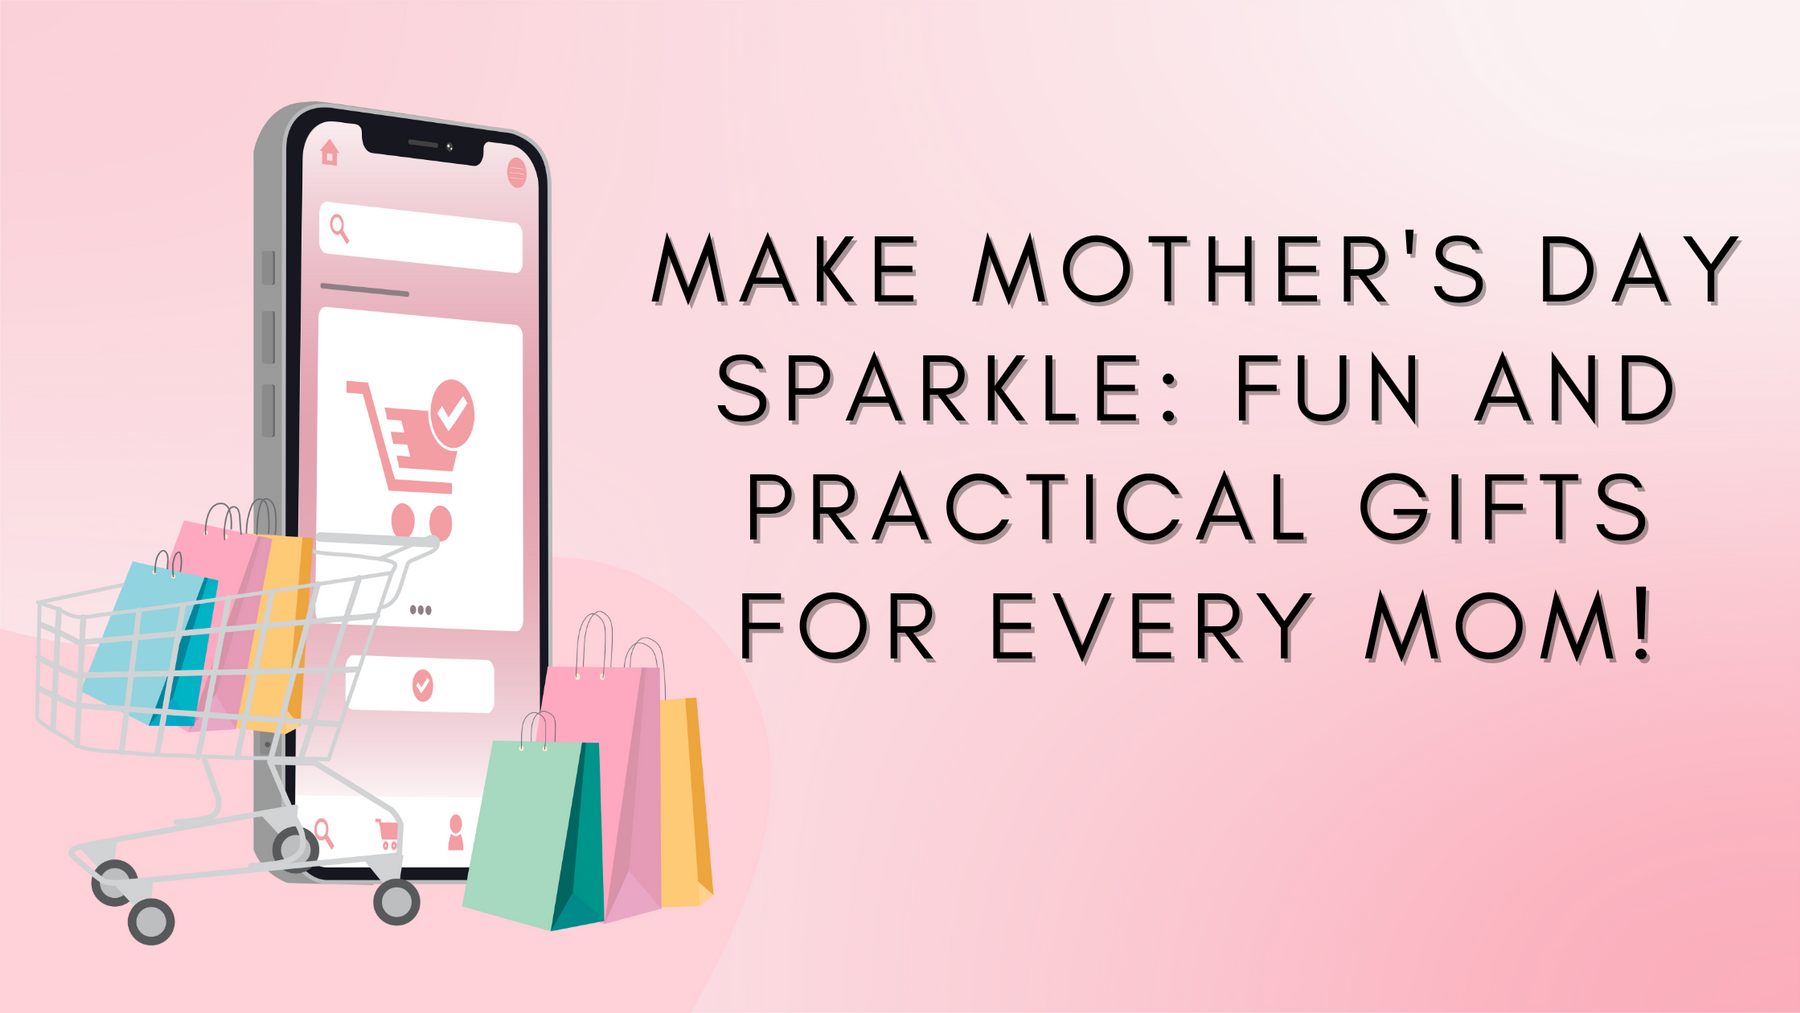 Make Mother's Day Sparkle: Fun and Practical Gifts for Every Mom!